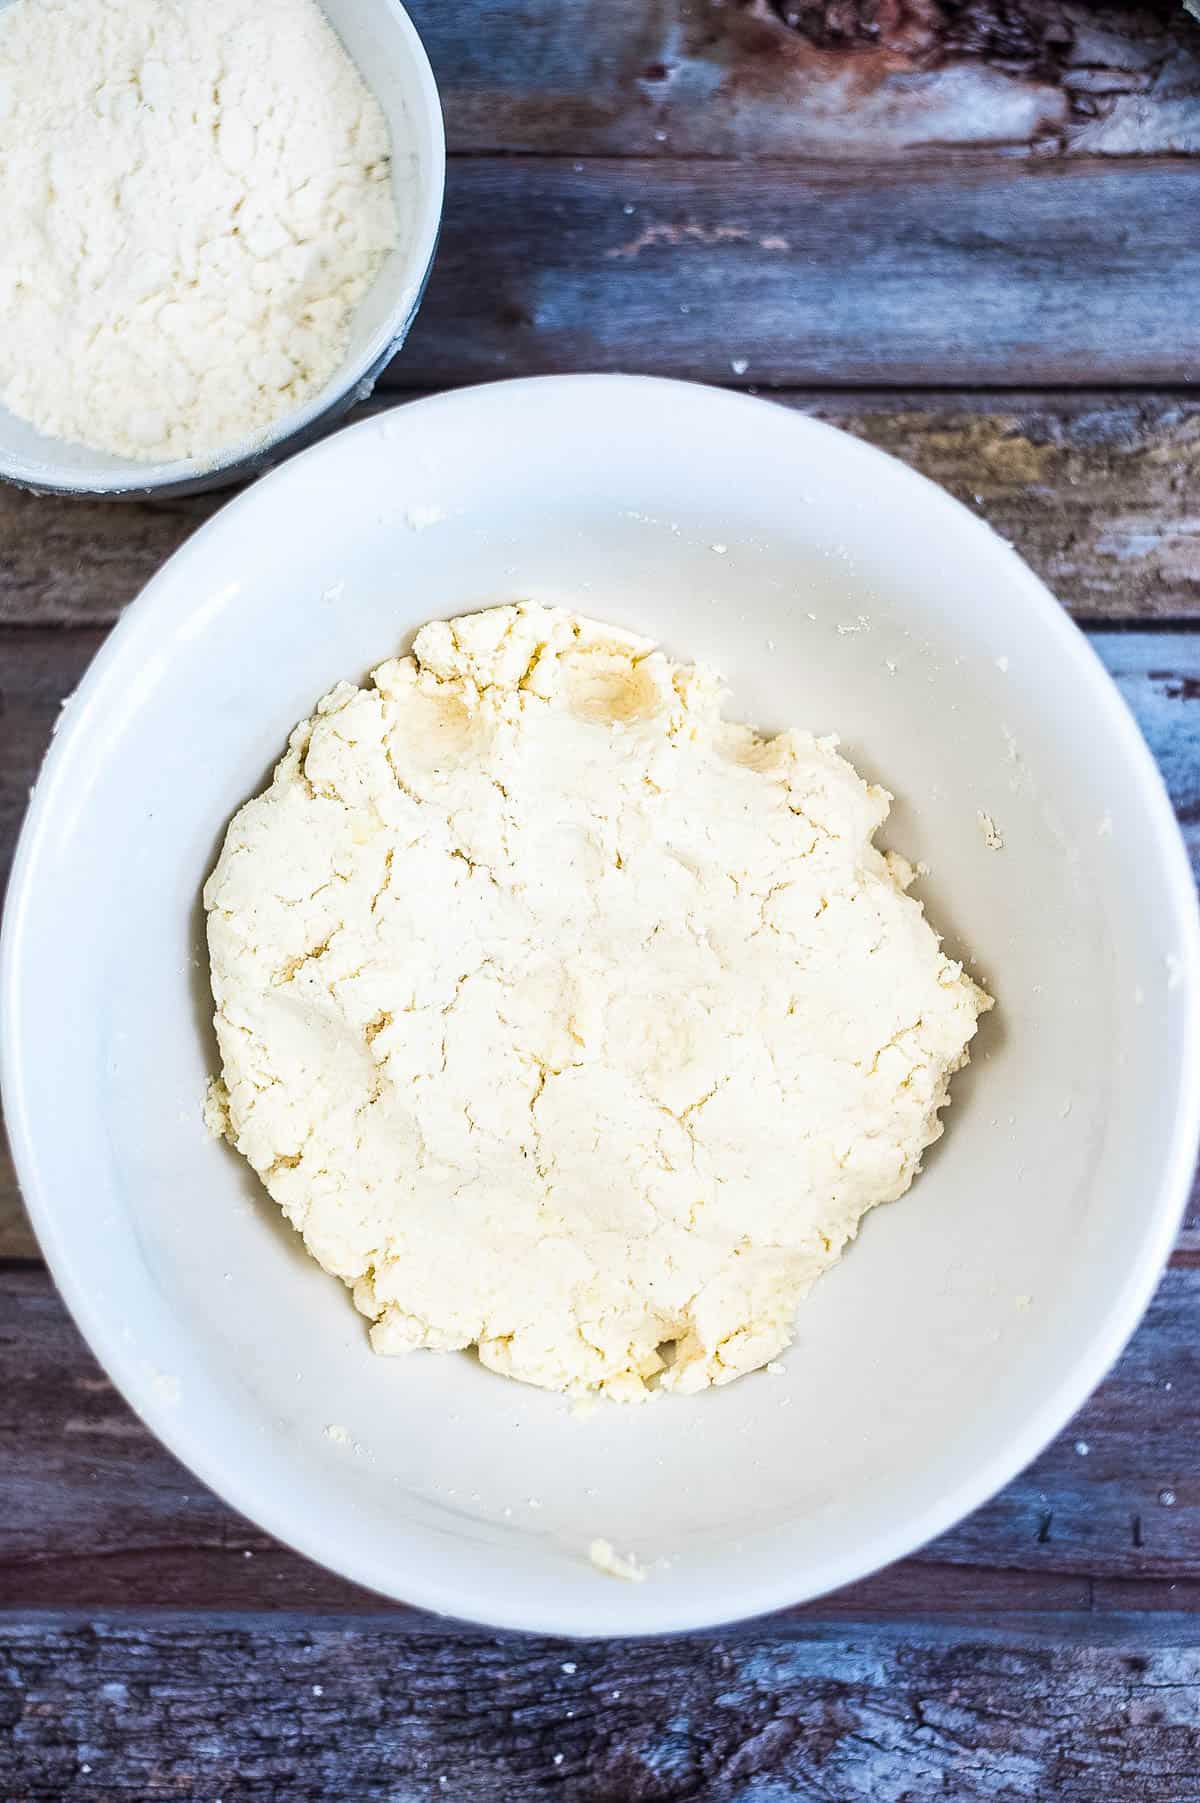 A bowl of dough and a bowl of flour on a wooden table for an arepas recipe.